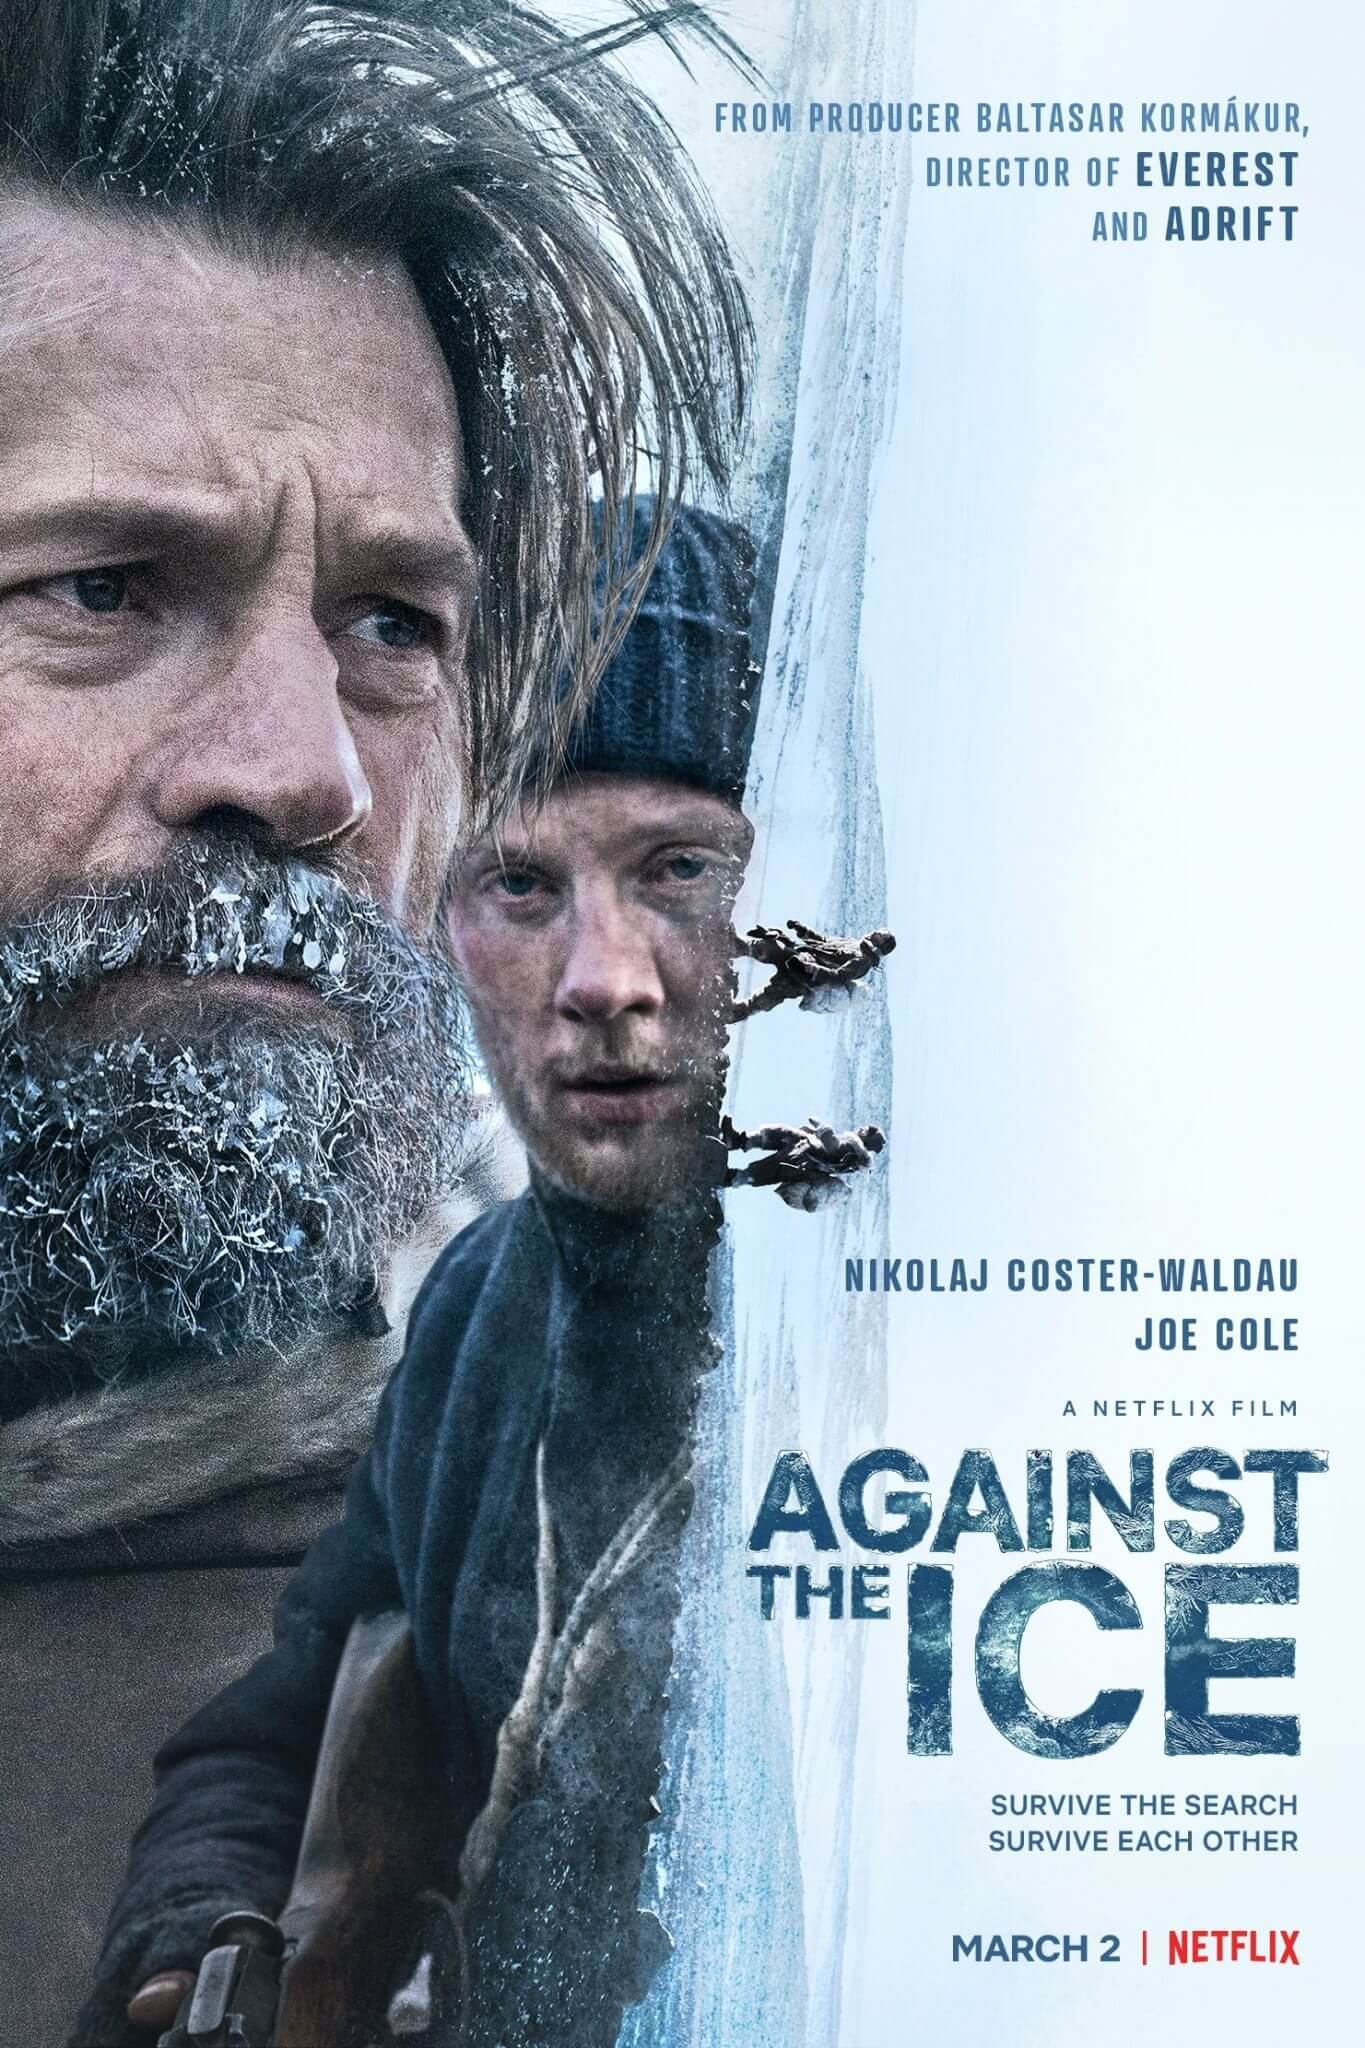 Netflix's 'Against the Ice' Film Everything You Need to Know What's